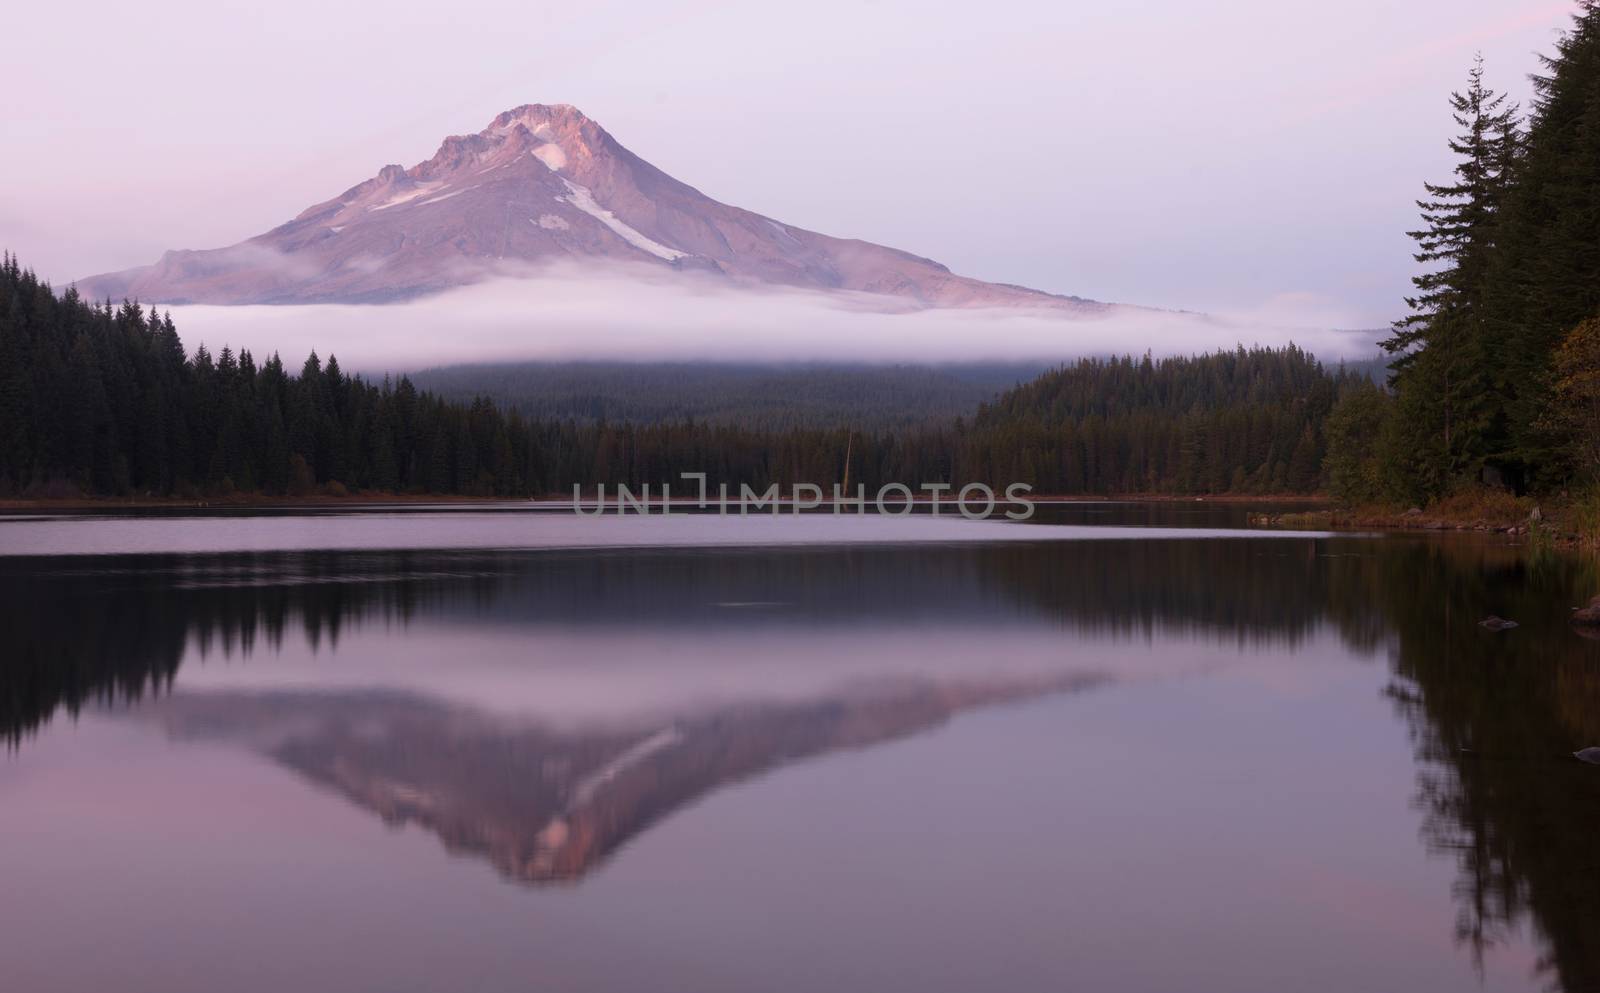 Mt Hood Smooth Reflection Trillium Lake Oregon Territory by ChrisBoswell